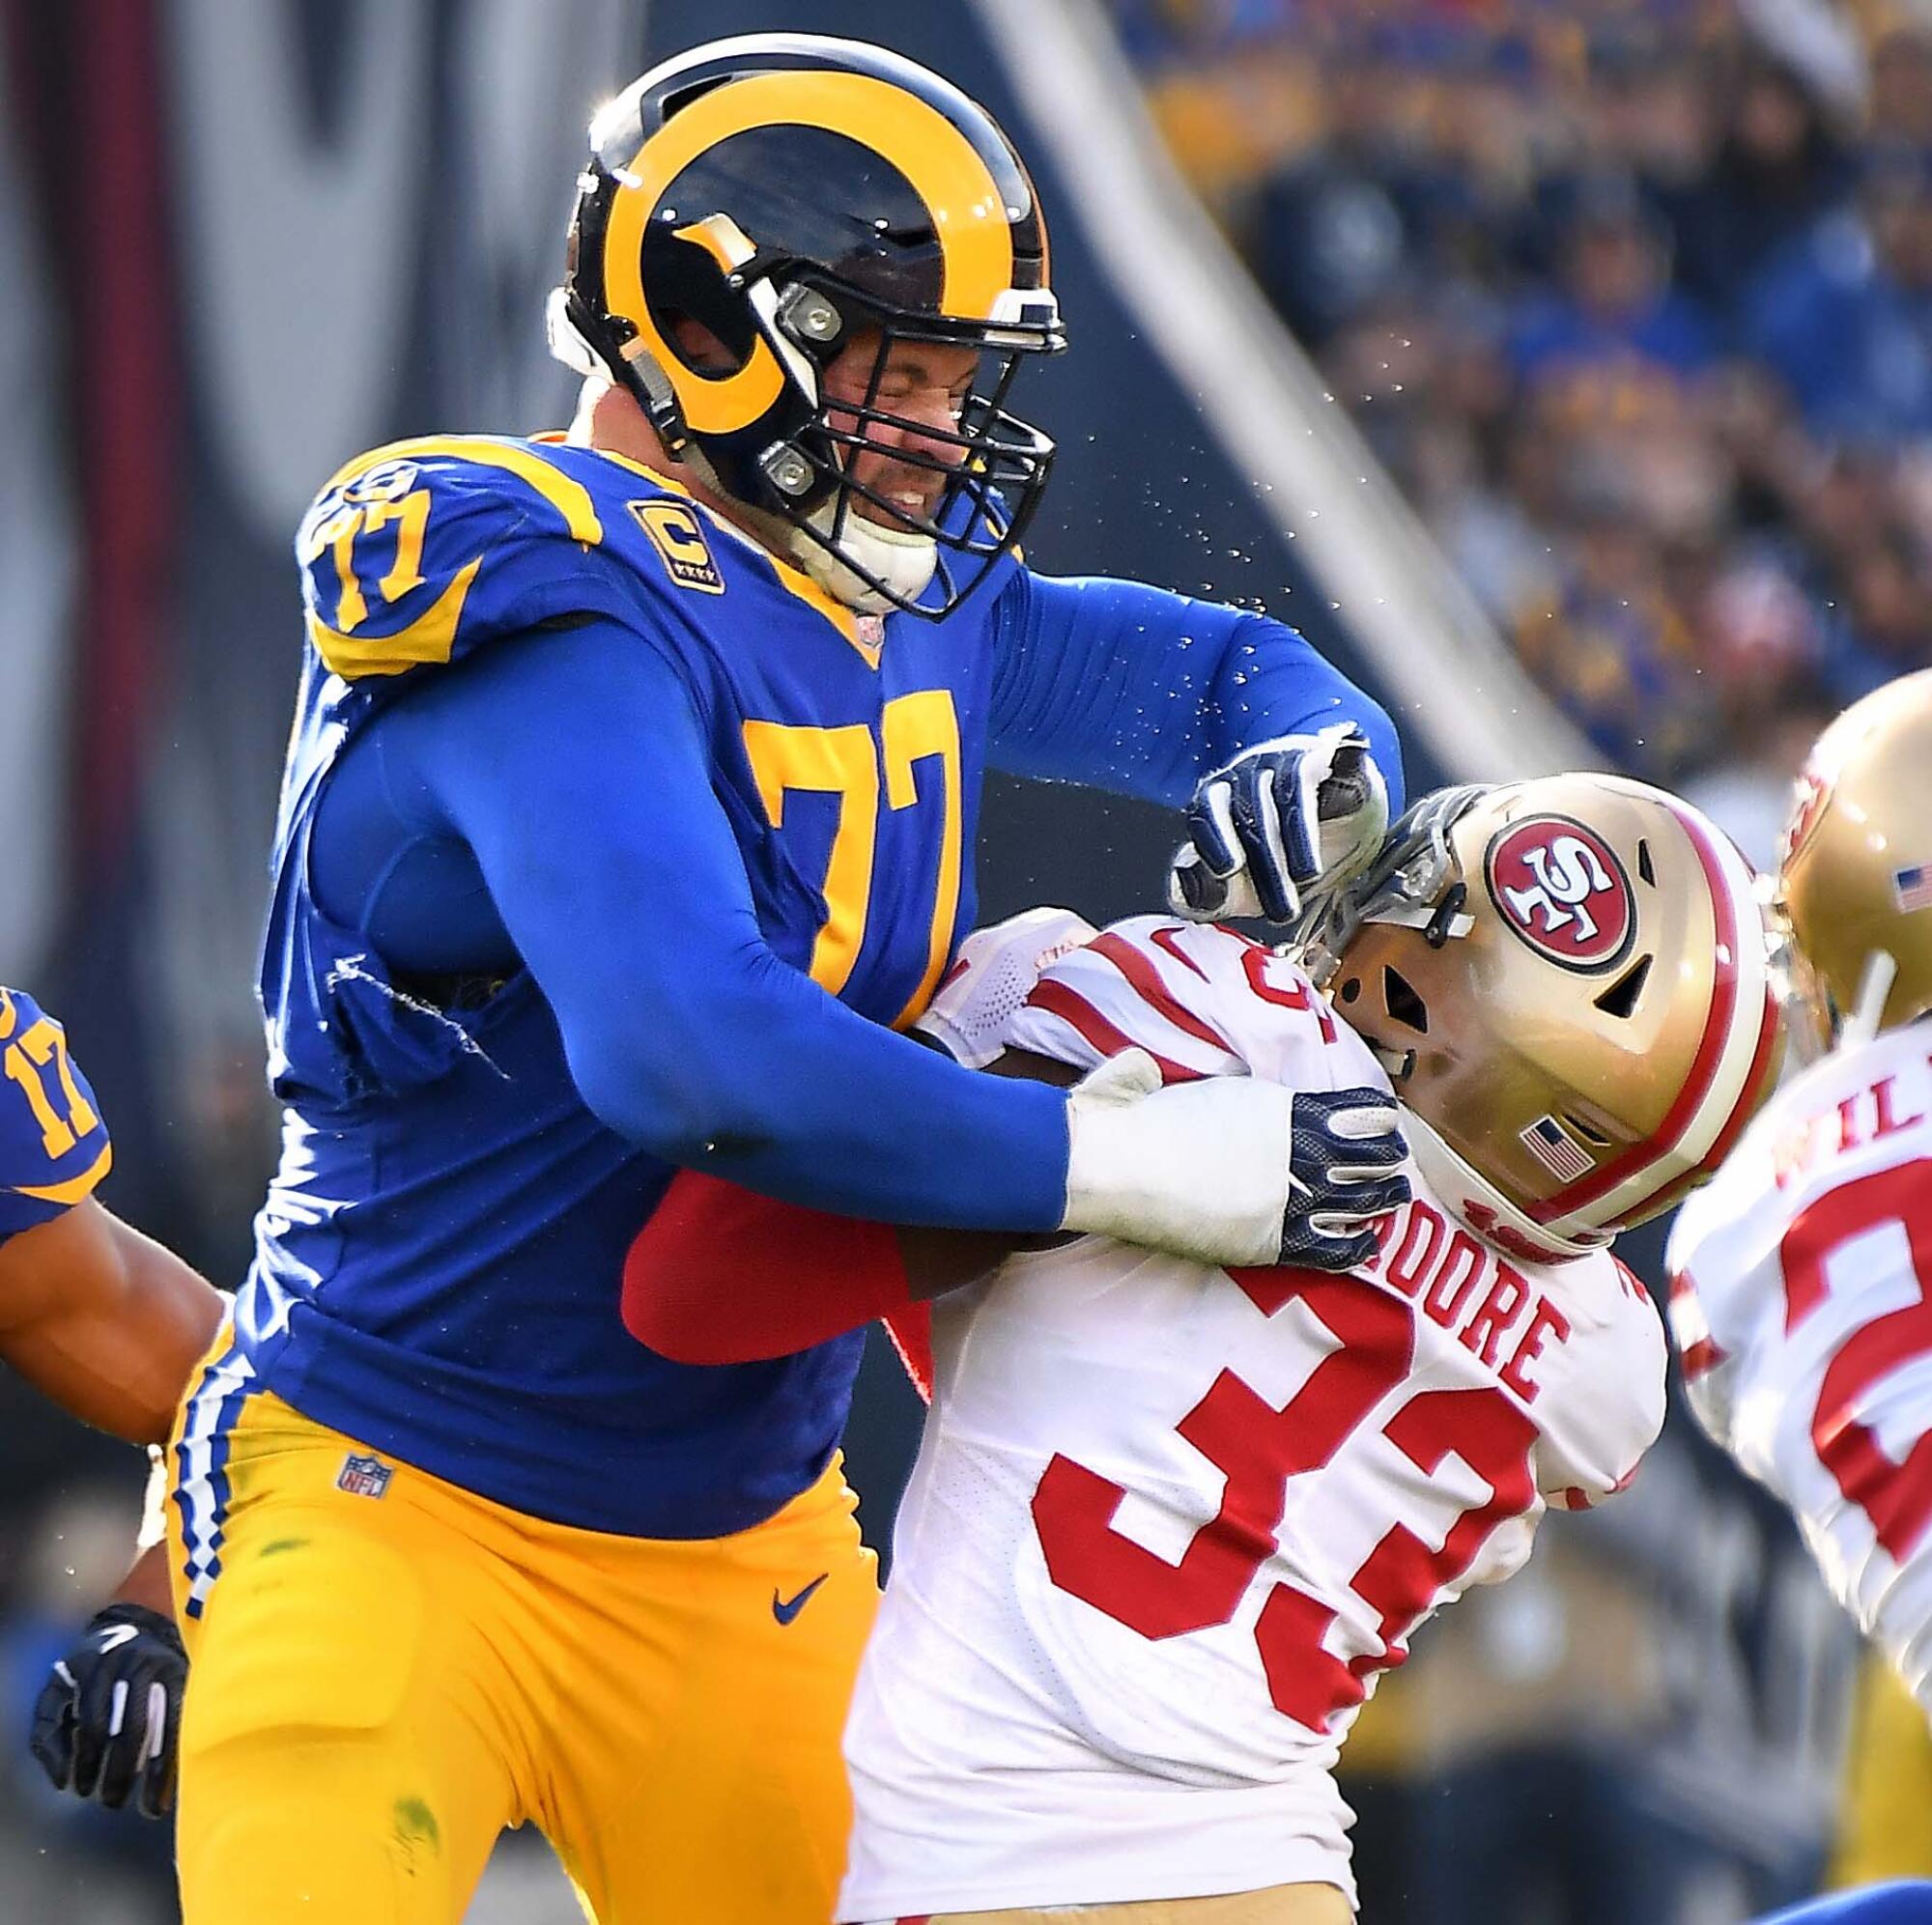 Rams offensive tackle Andrew Whitworth blocks the 49ers' Tarvarius Moore.